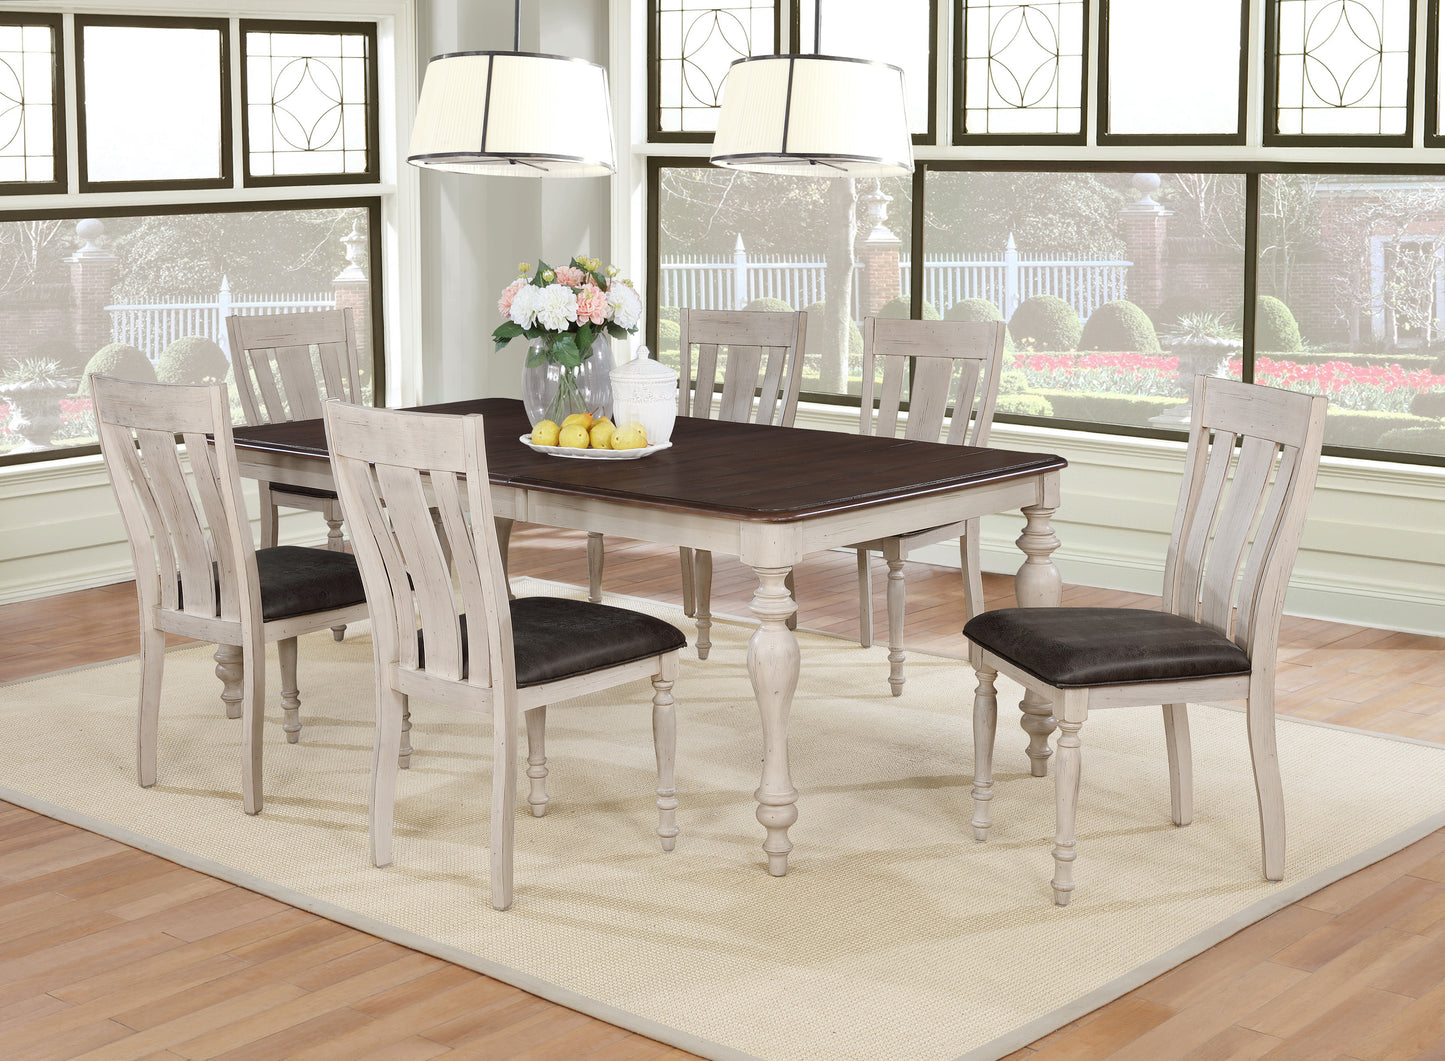 Arch Weathered Oak Dining Table With Extension Leaf